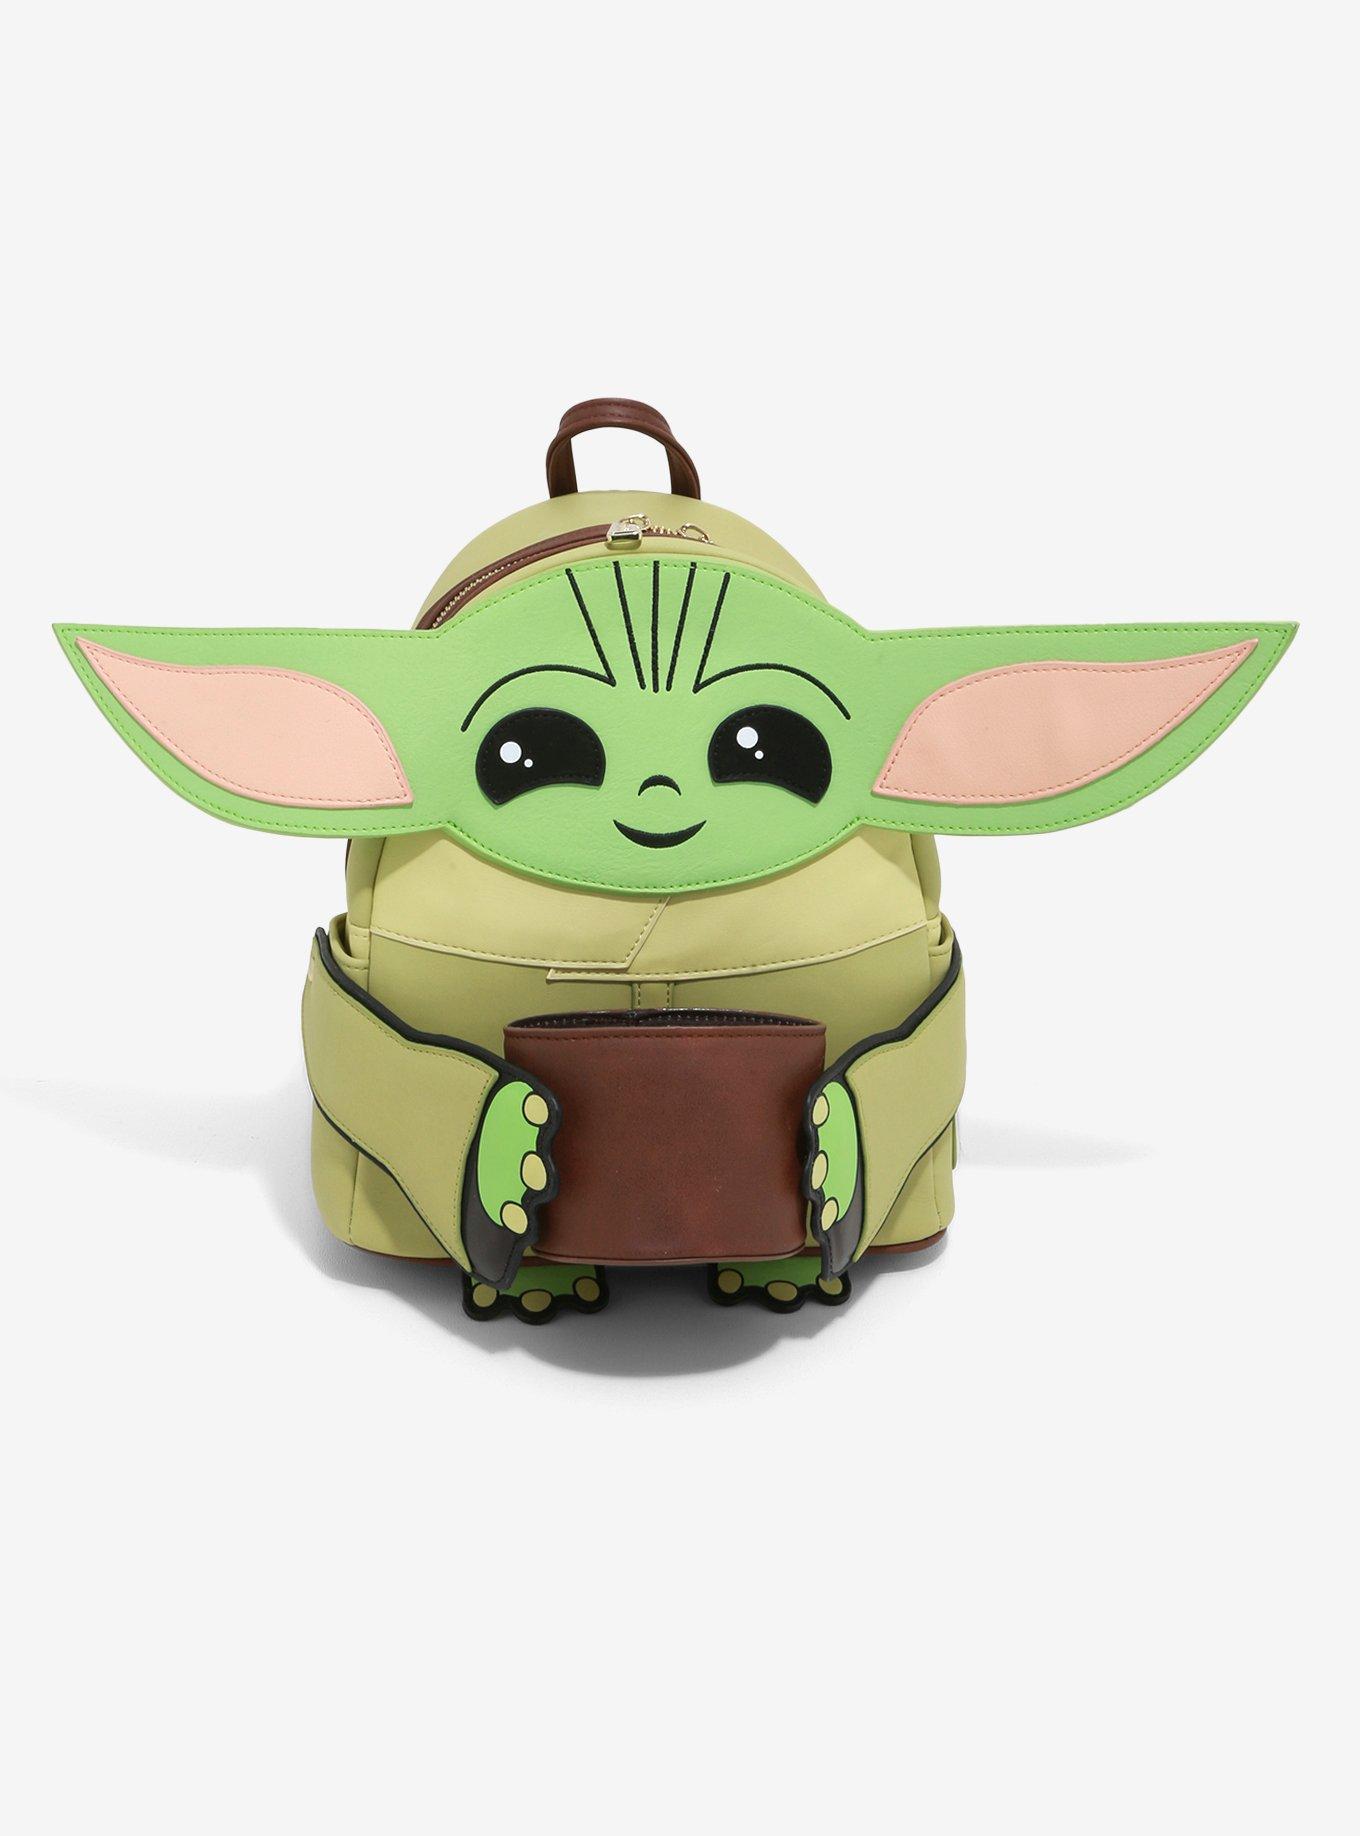 Check Out These Adorable Baby Yoda Mugs and Backpacks! 